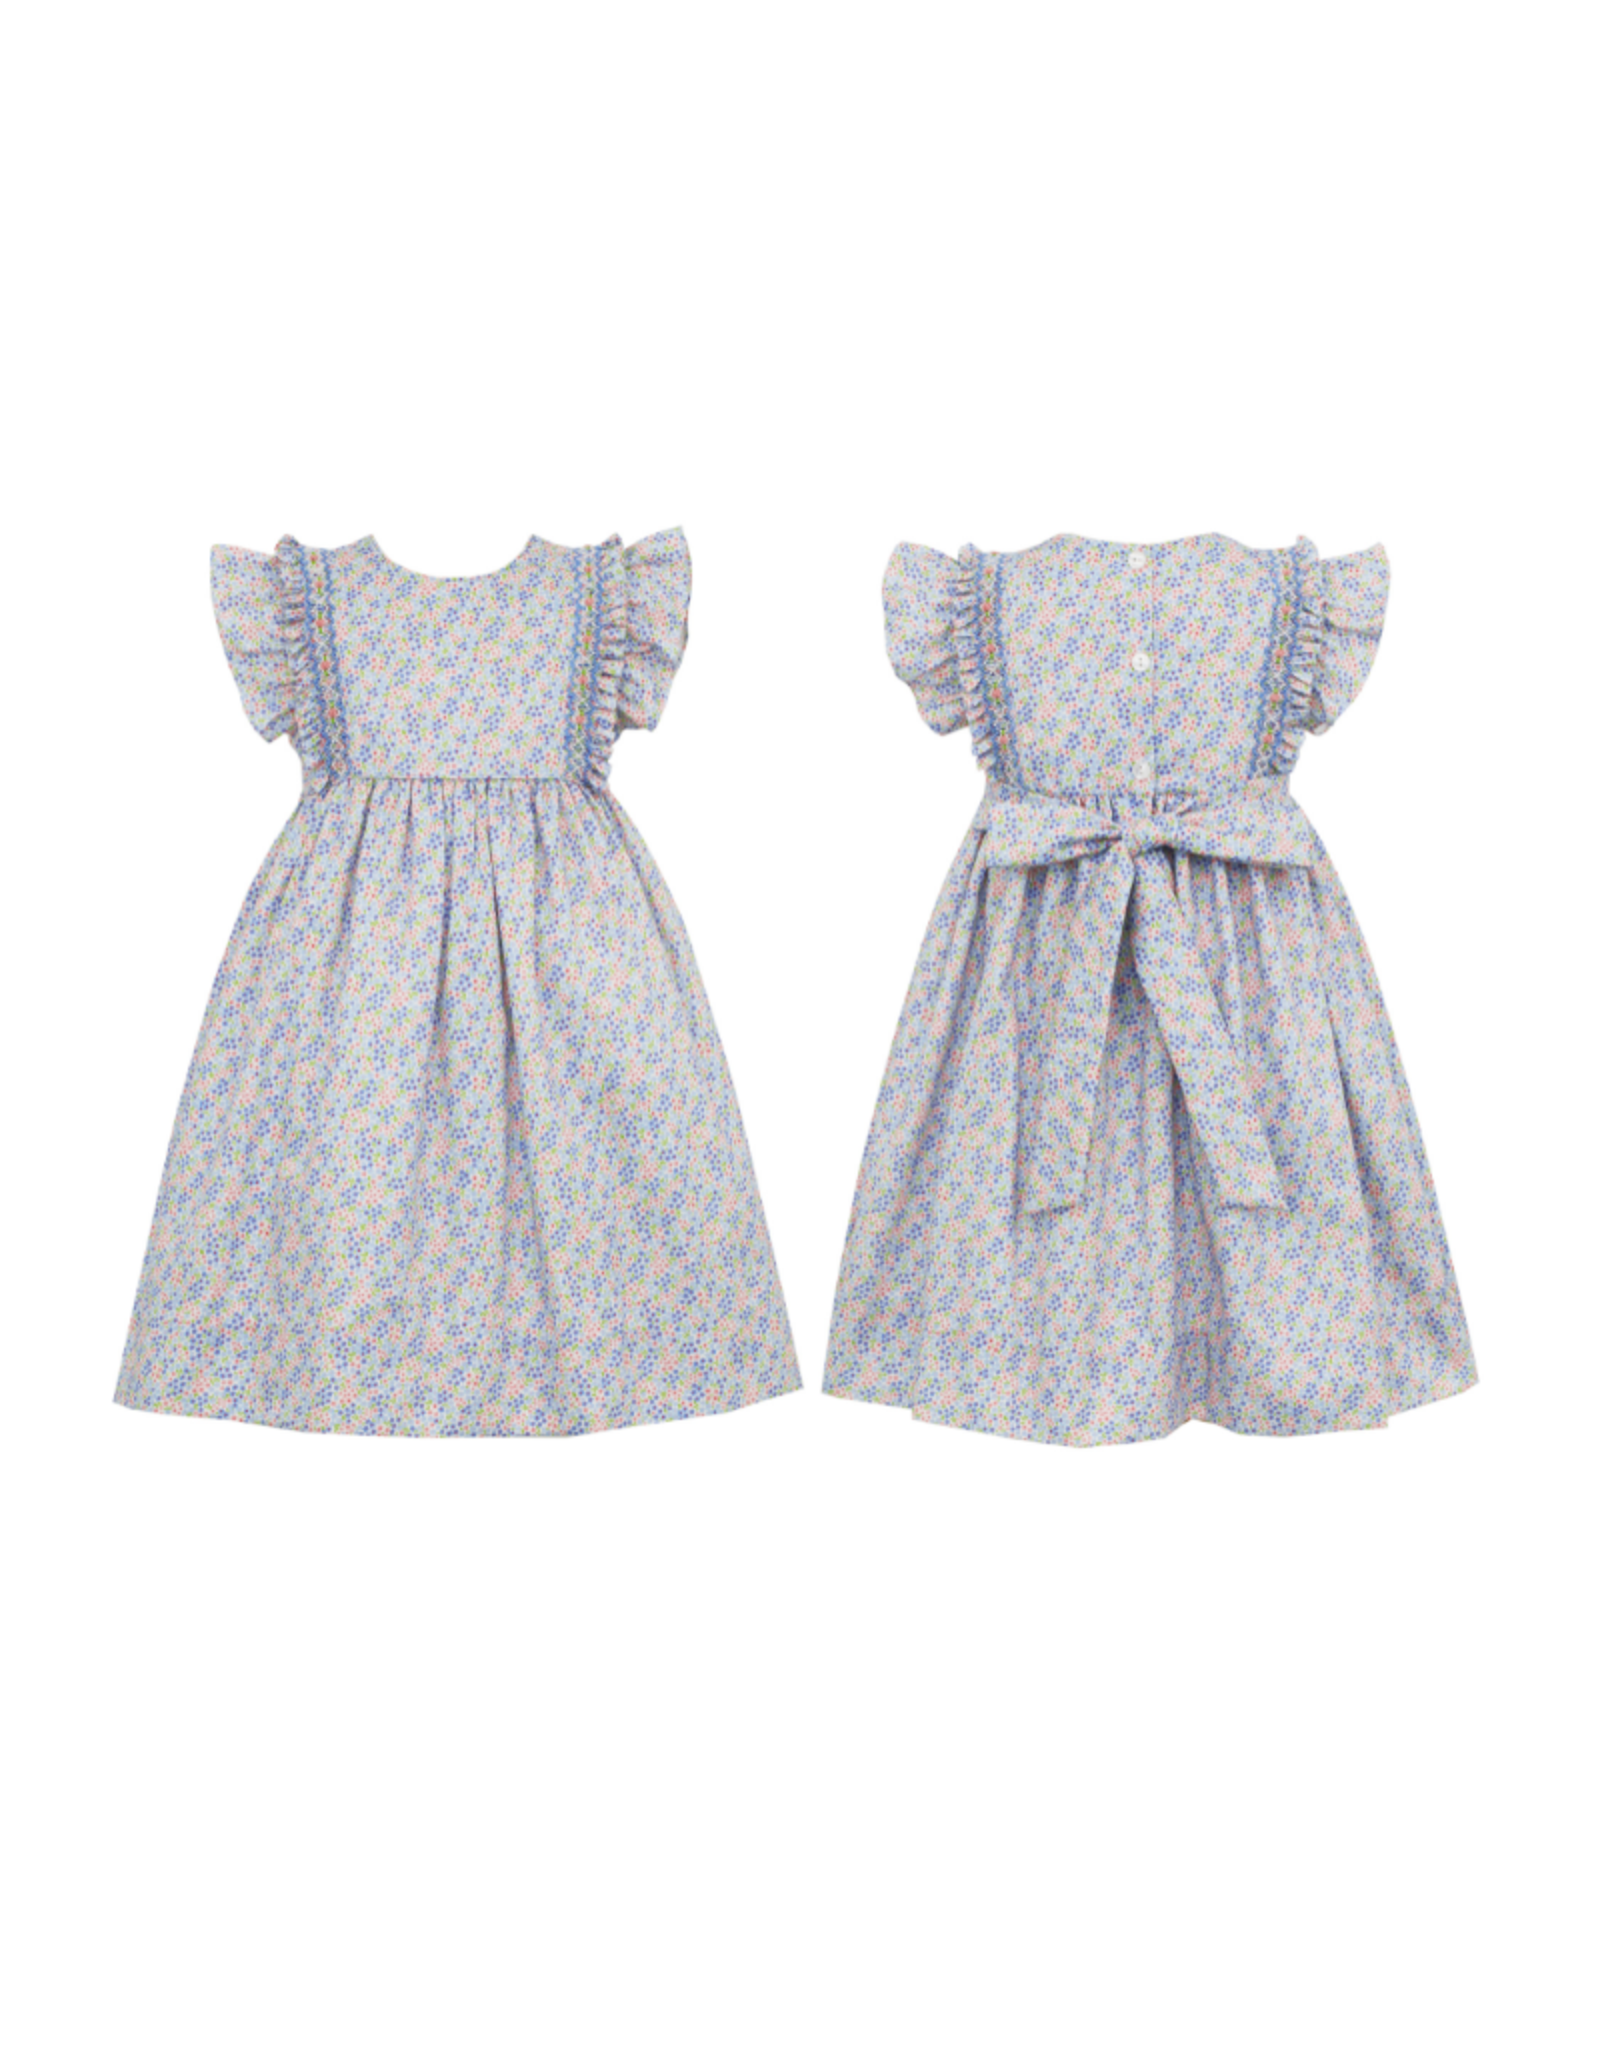 Claire and Charlie Pink/Blue Liberty Dress w/ Smocking